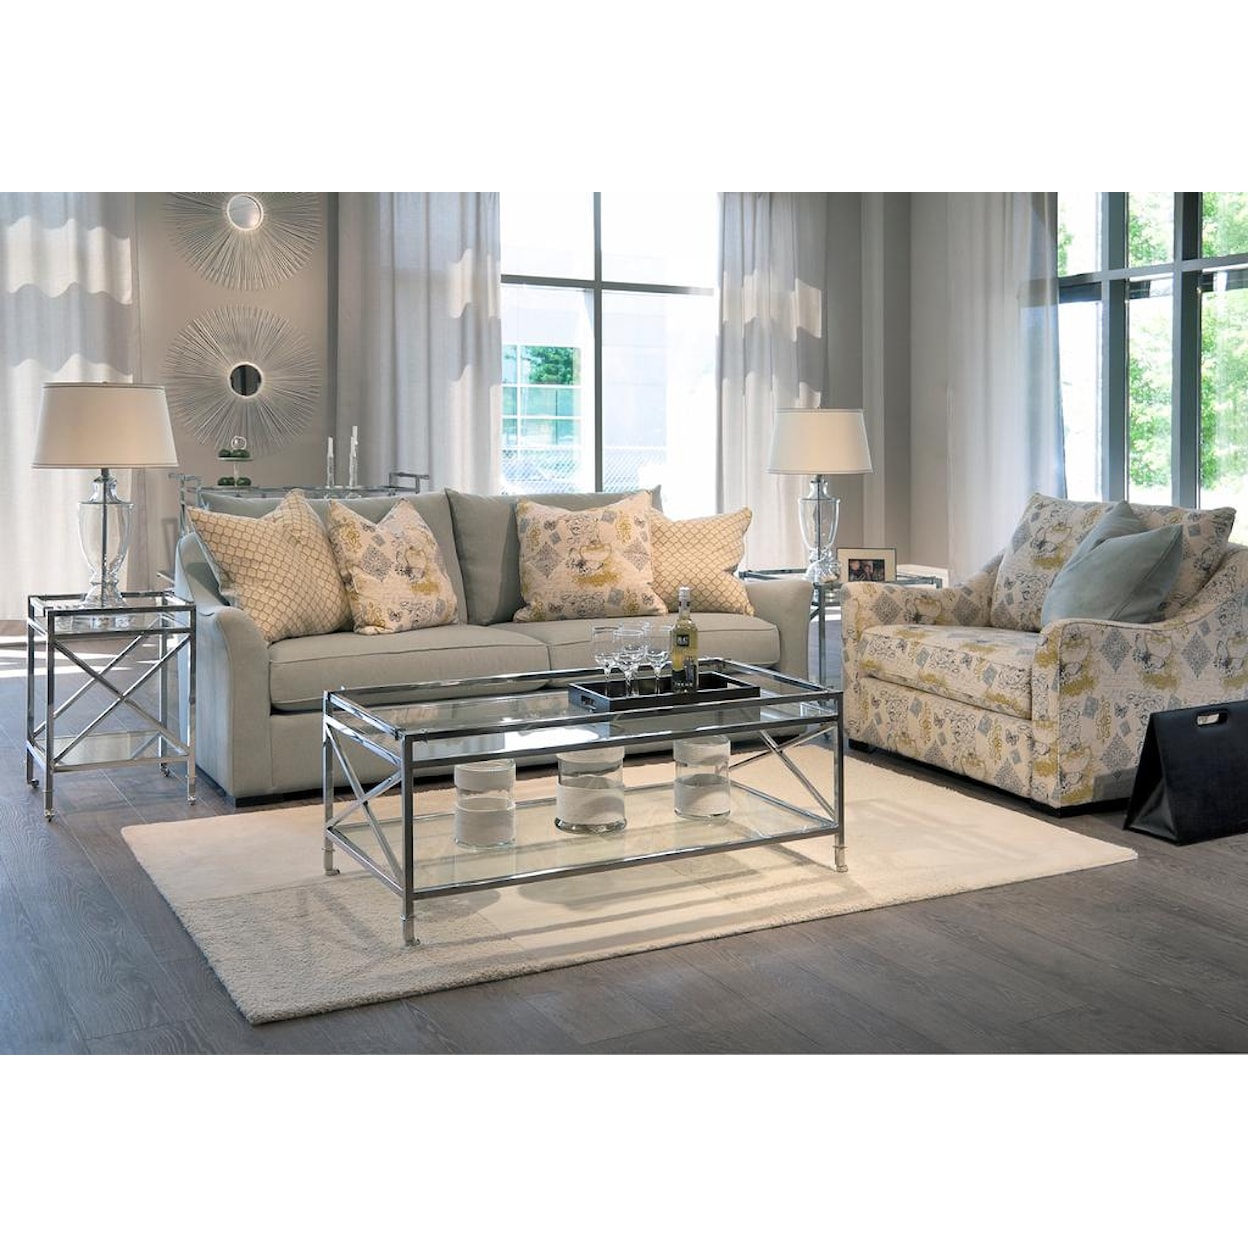 Decor-Rest 7112 Series Stationary Living Room Group